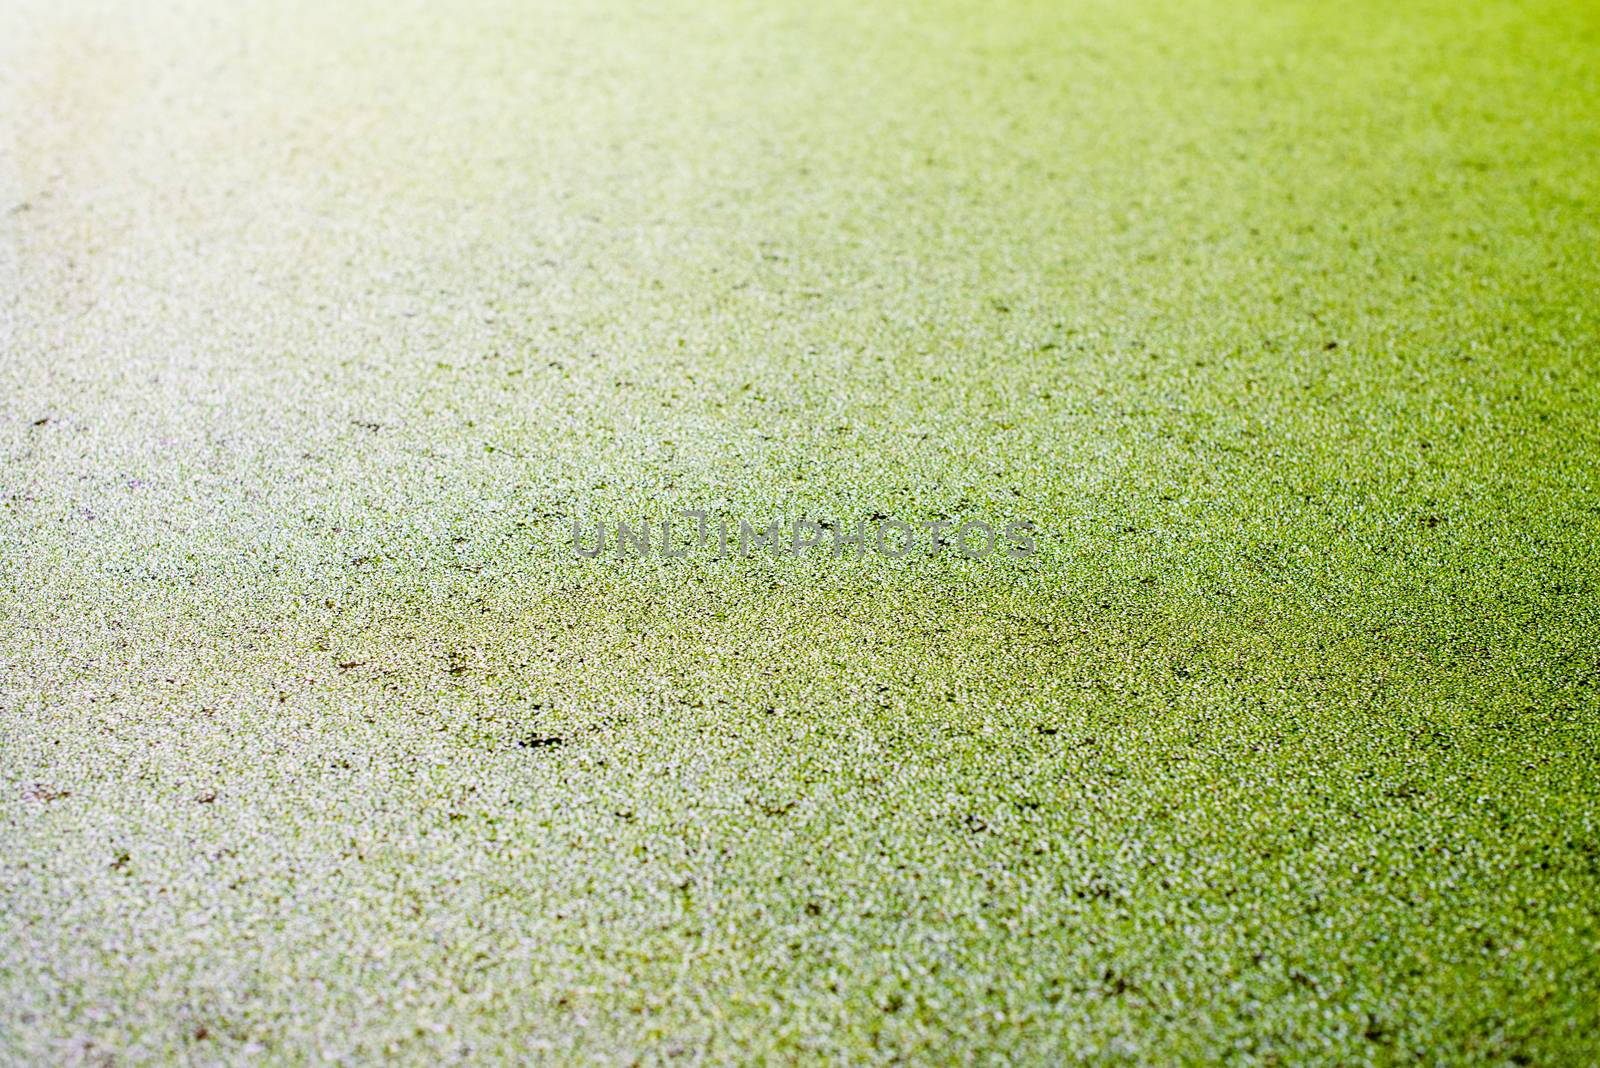 Water surface covered with green duckweed by rootstocks